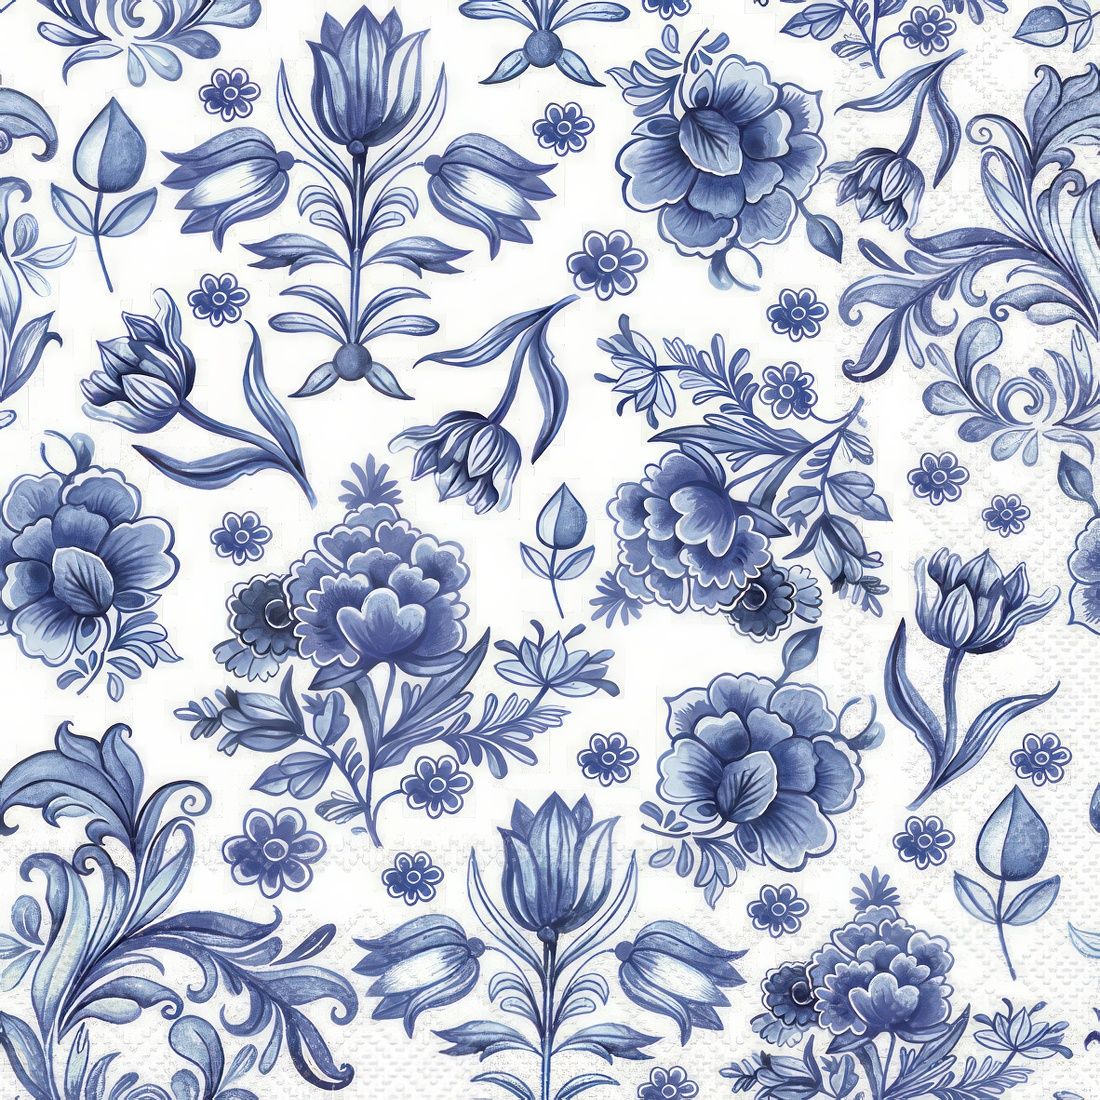 Decoupage Paper Napkins - Floral - Delft Blue Flowers
This decoupage tissue paper napkin features a classic blue and white floral pattern. The design consists of intricate floral motifs including various types of flowers, leaves, and vines. The rich blue color contrasts beautifully against the crisp white background, creating a timeless and elegant look. The repetitive nature of the pattern adds a sense of continuity and harmony to the overall design. This napkin would be perfect for decoupage projects, adding a touch of traditional charm to any craft or table setting.